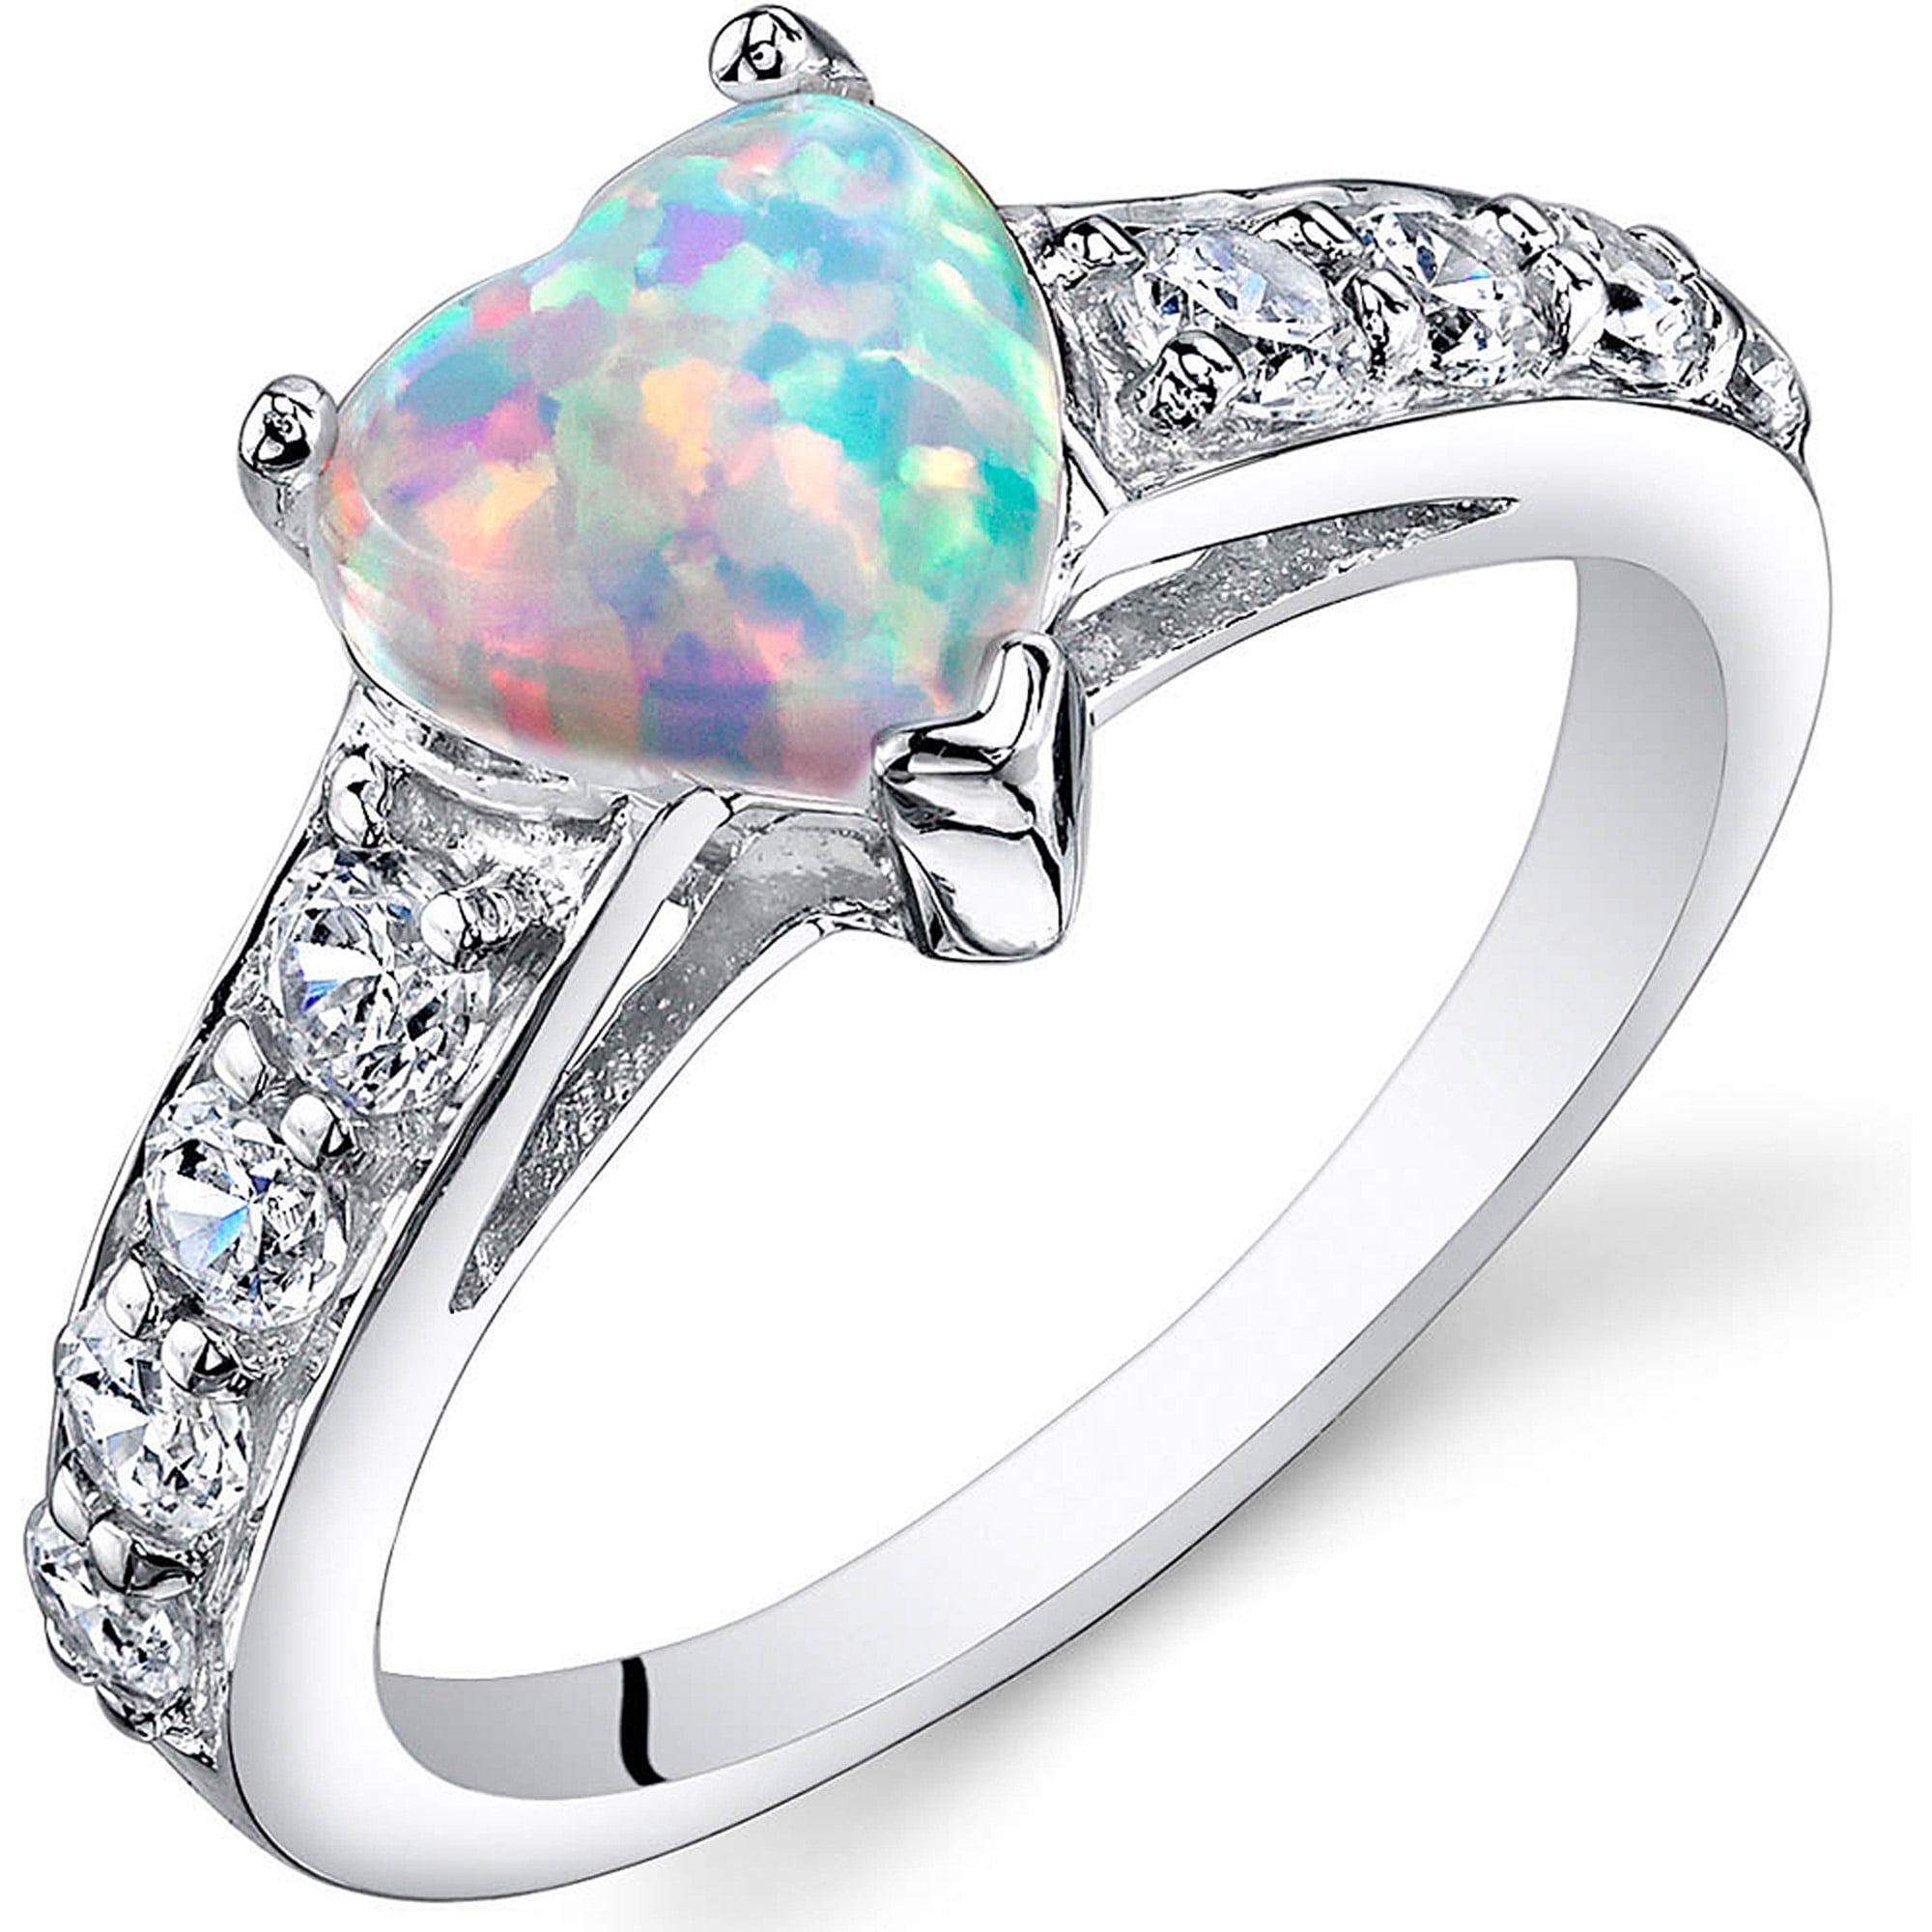 ACEFEEL 925 Sterling Silver Heart Shaped White Opal Engagement Promise Band Ring 